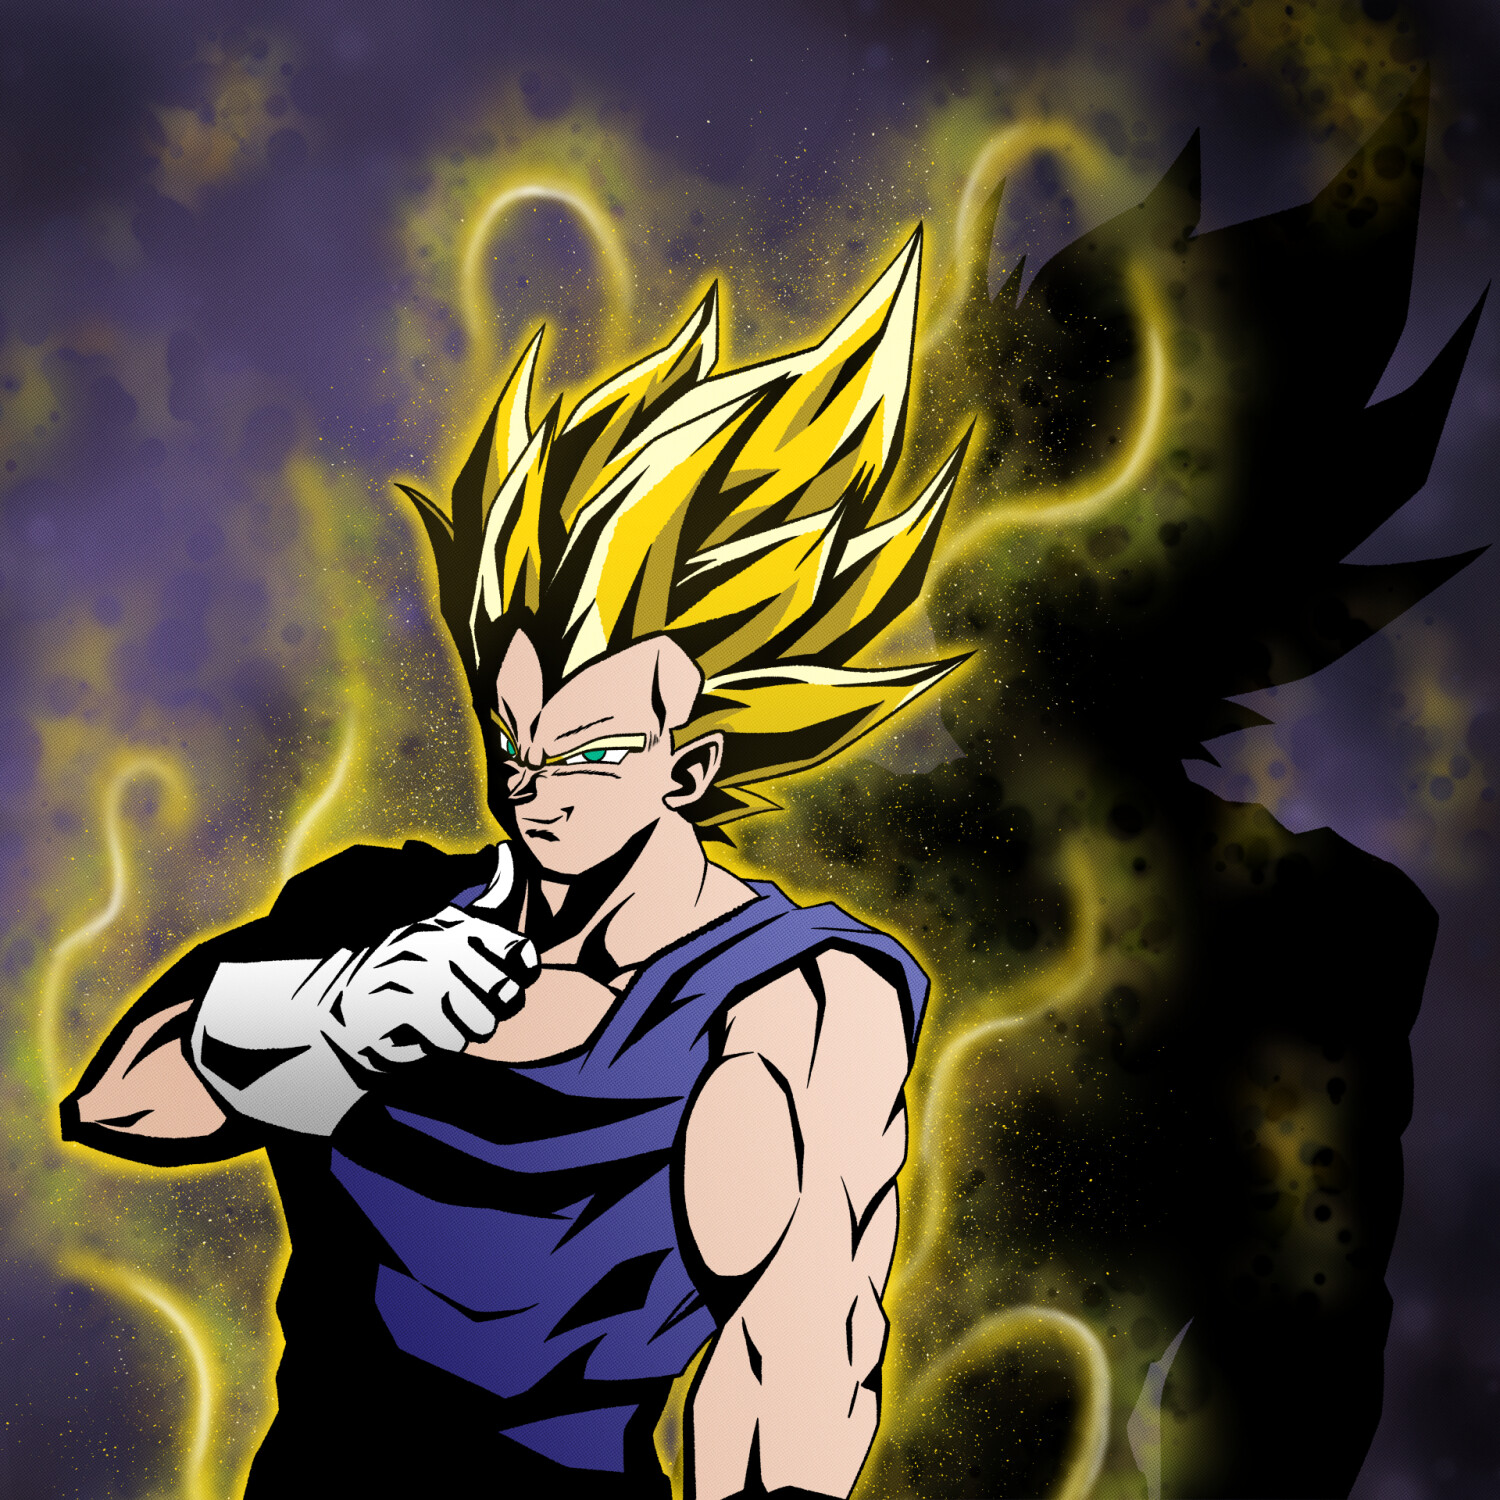 Vegeta Wallpaper For Android (76+ images)